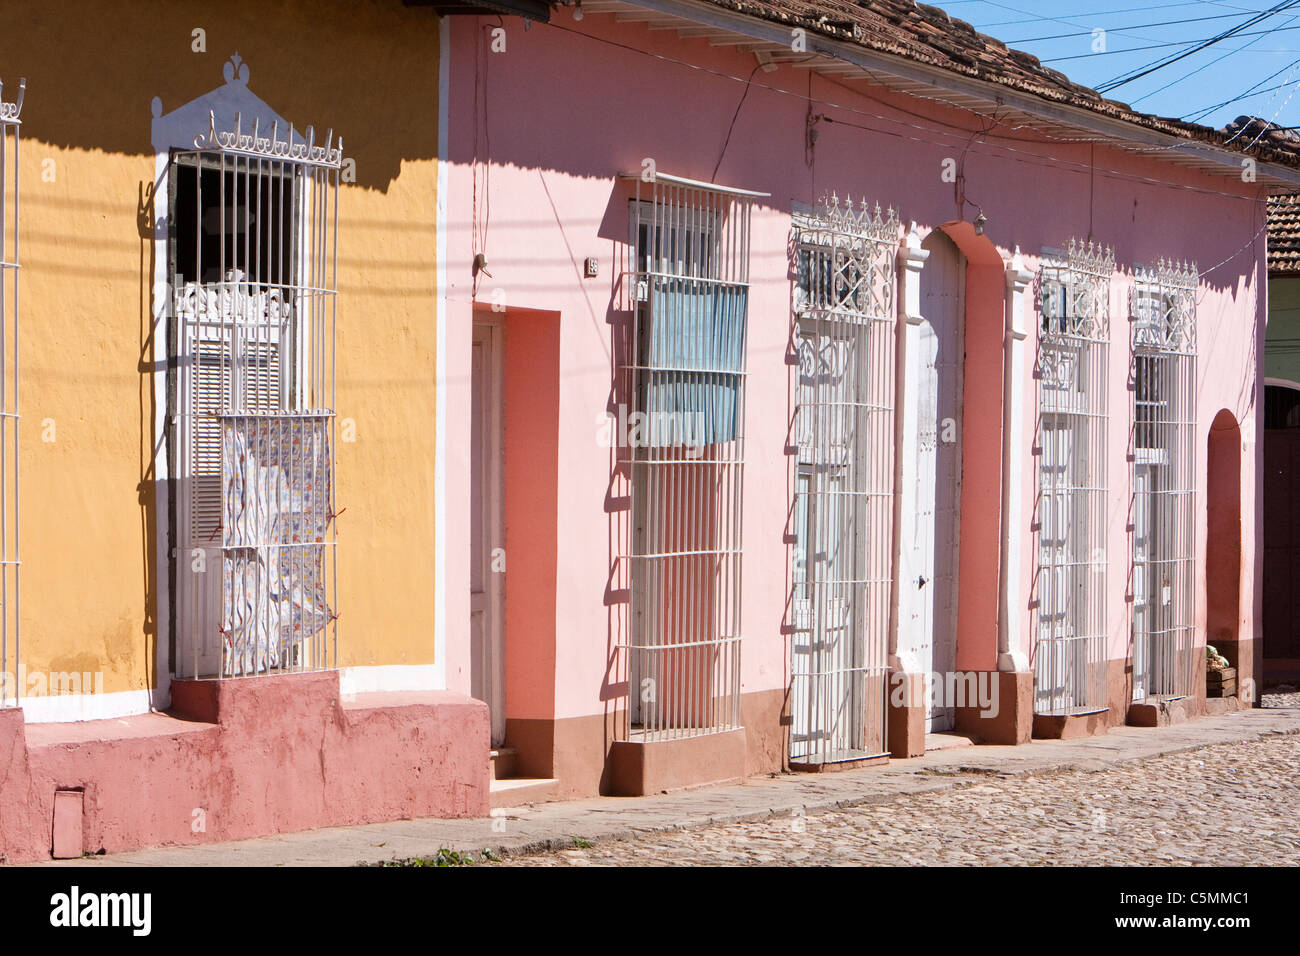 Cuba, Trinidad. Houses with Protective Grilles over Doors and Windows. Stock Photo